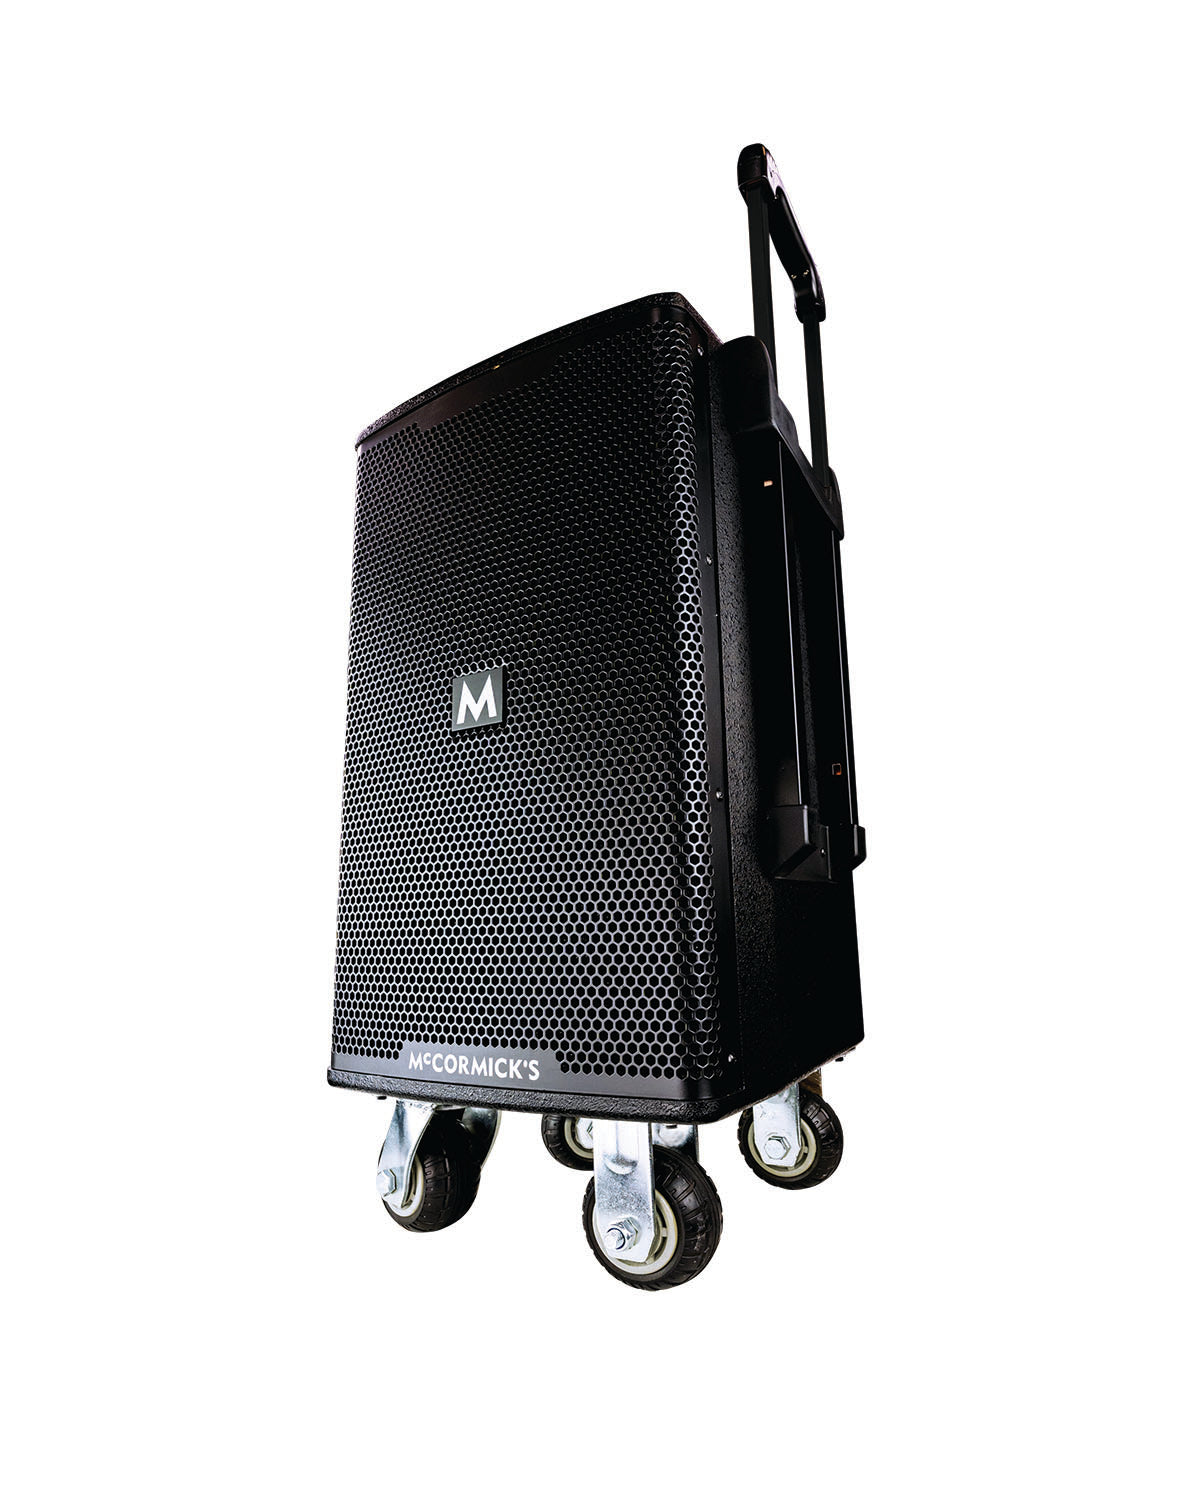 Fortissimo Portable PA System